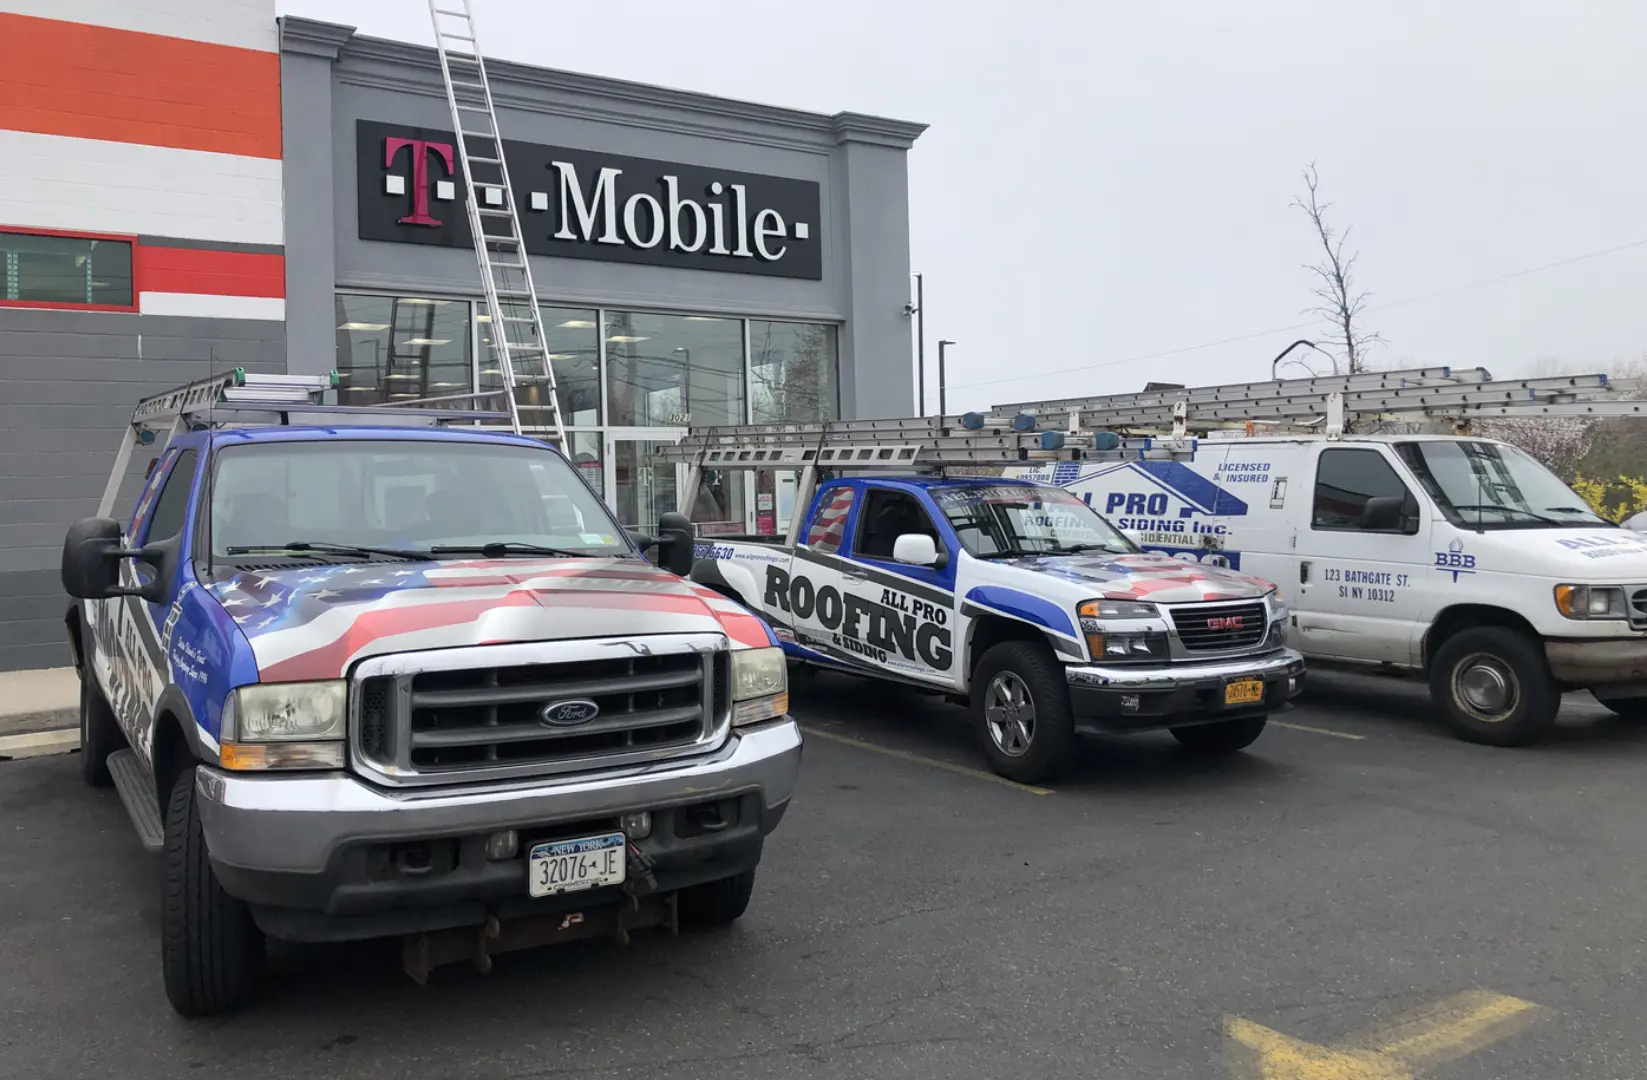 A group of trucks parked in front of a t-mobile store.